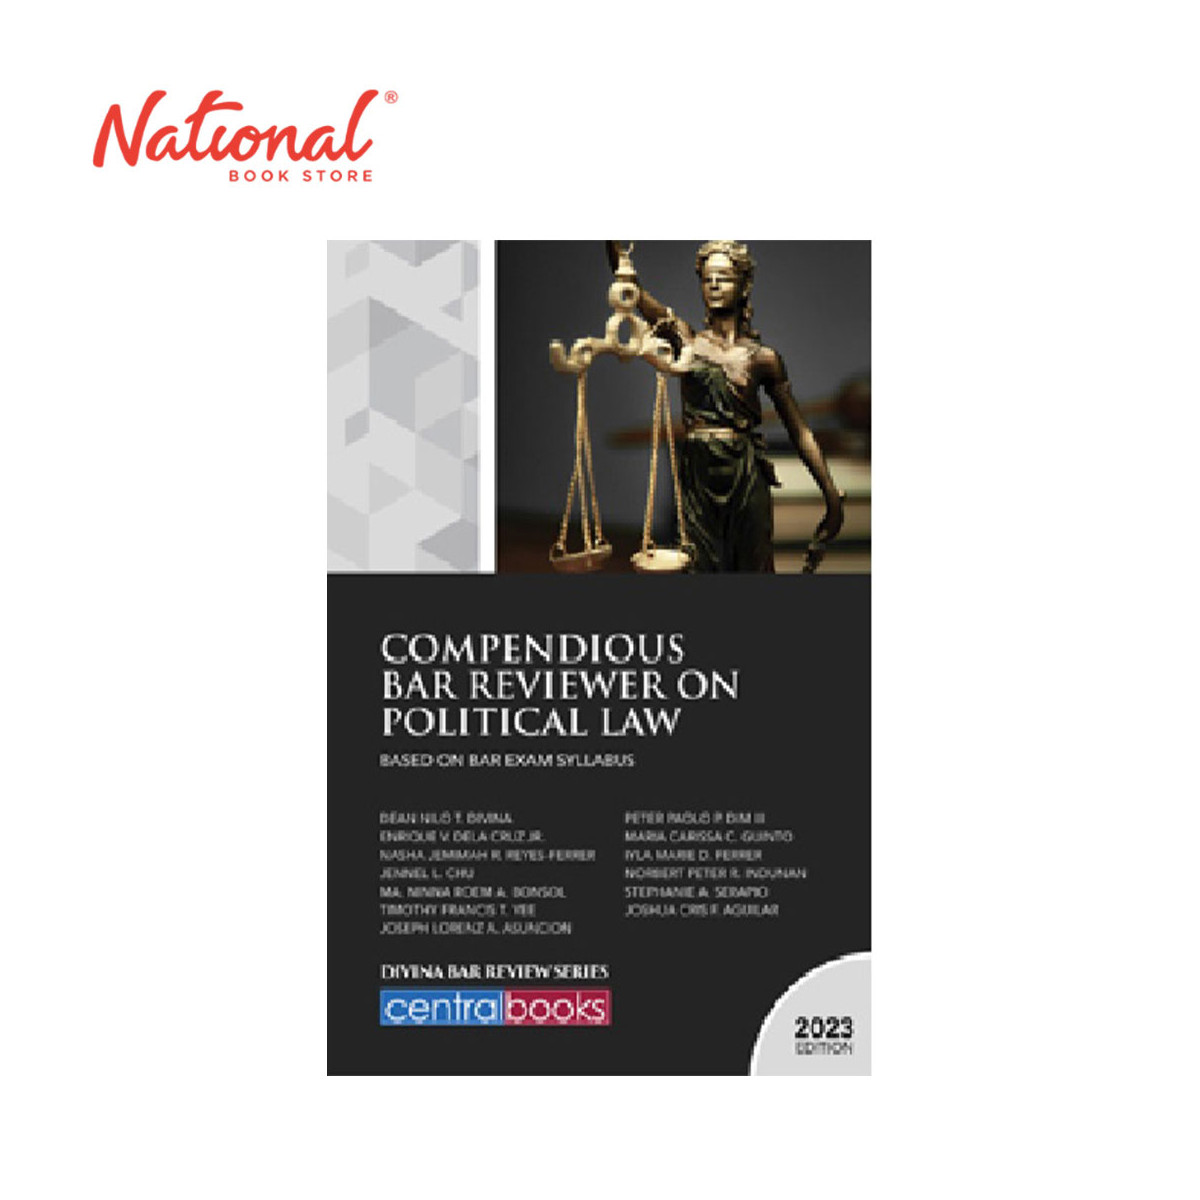 *SPECIAL ORDER* Compendious Bar Reviewer on Political Law (2023) by Dean Nilo Divina - Trade Paperback - College Books